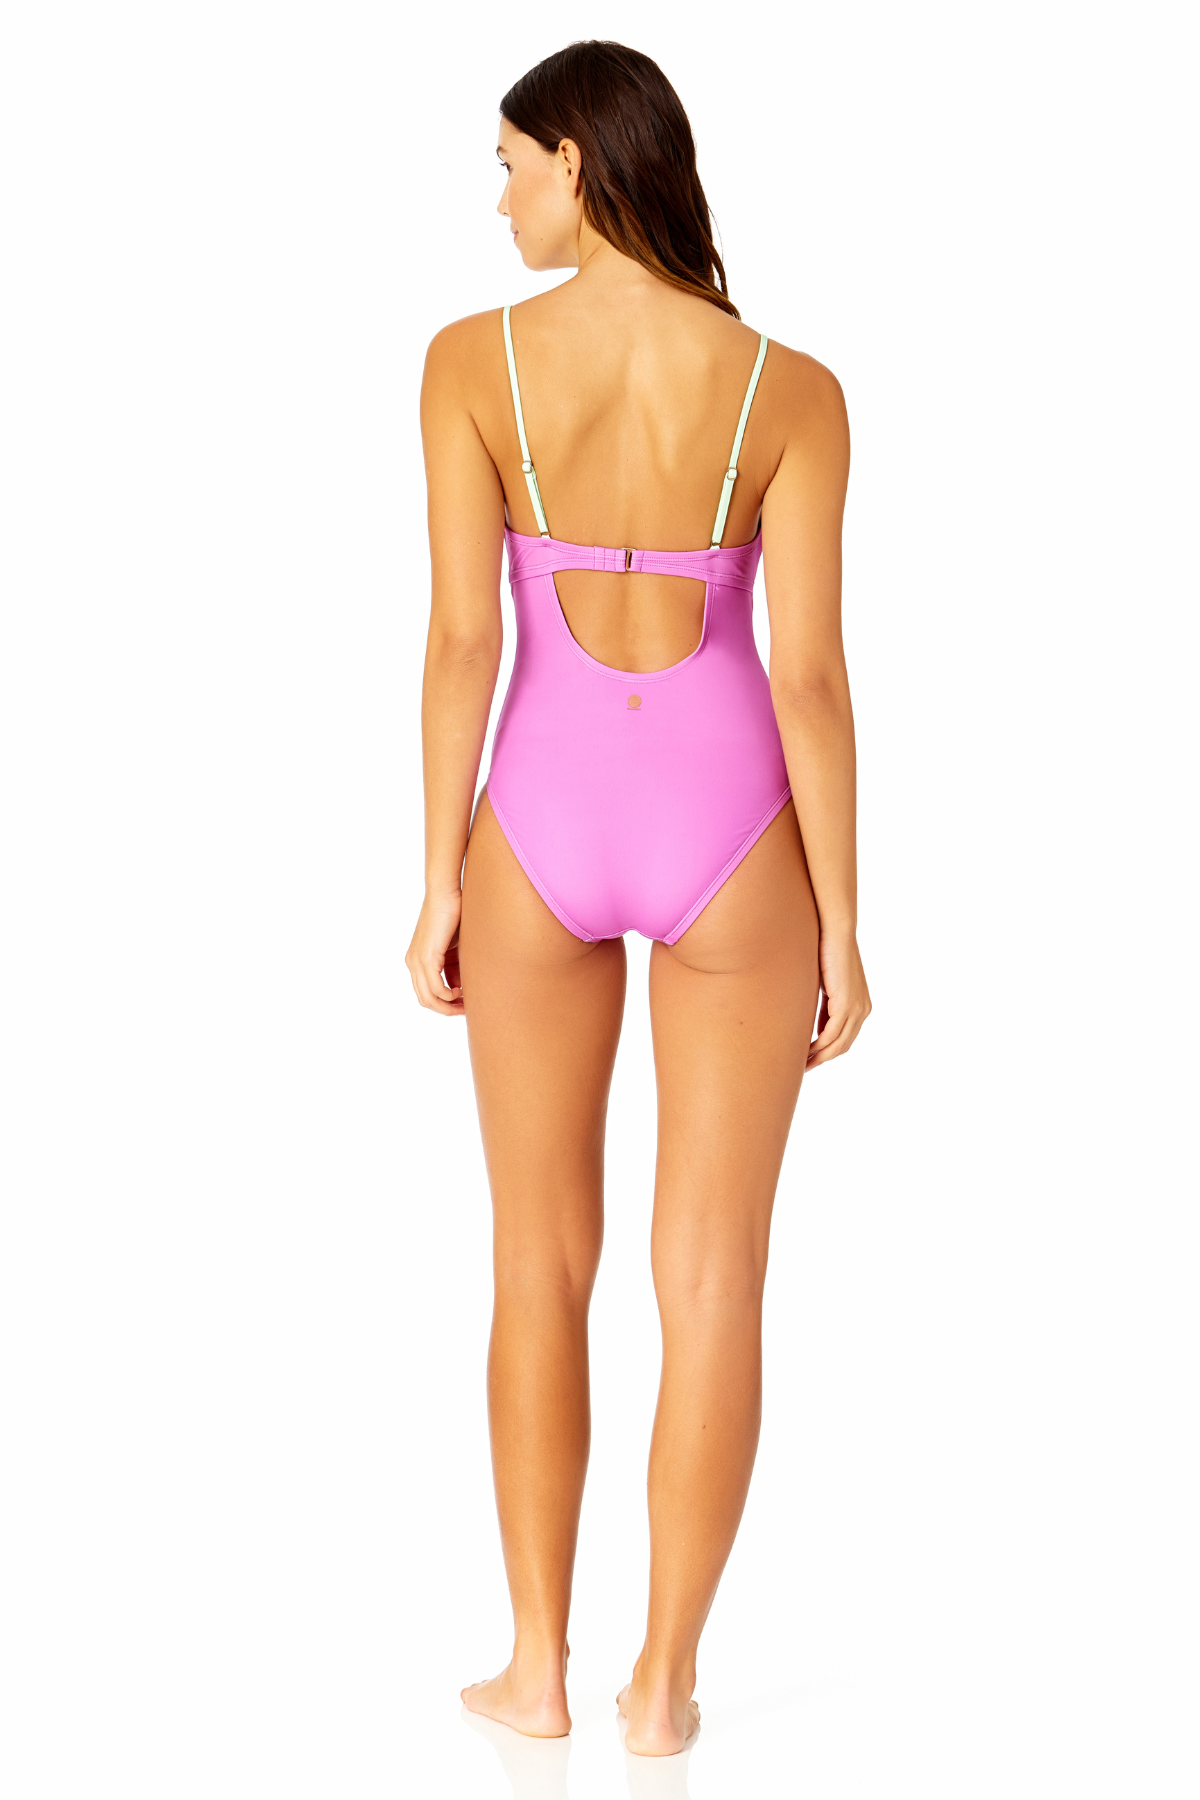 Women's Solid Piped Keyhole One Piece Swimsuit